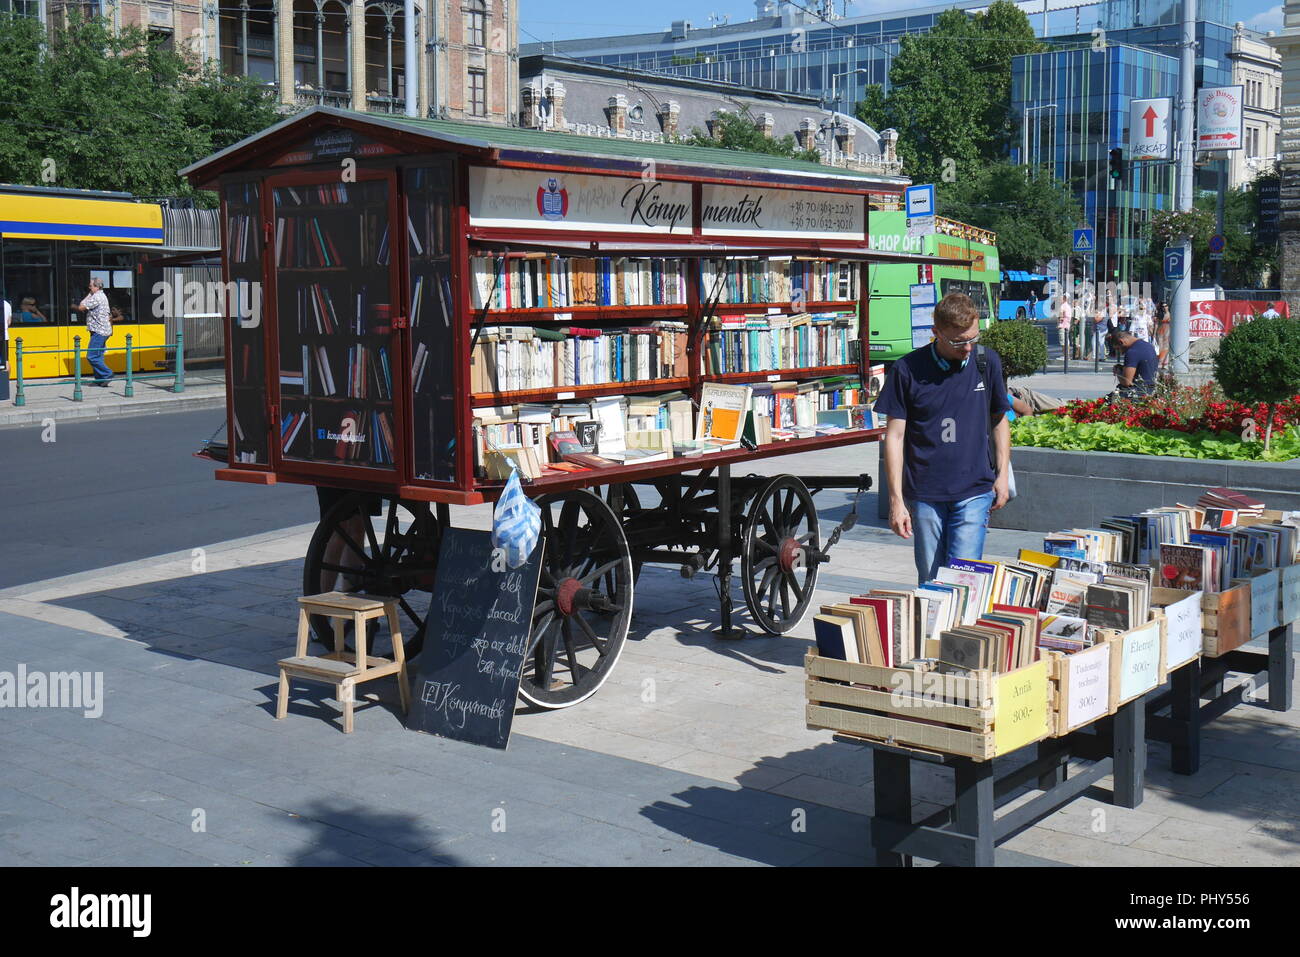 Mobile bookshop selling second-hand books on the street, Budapest, Hungary Stock Photo